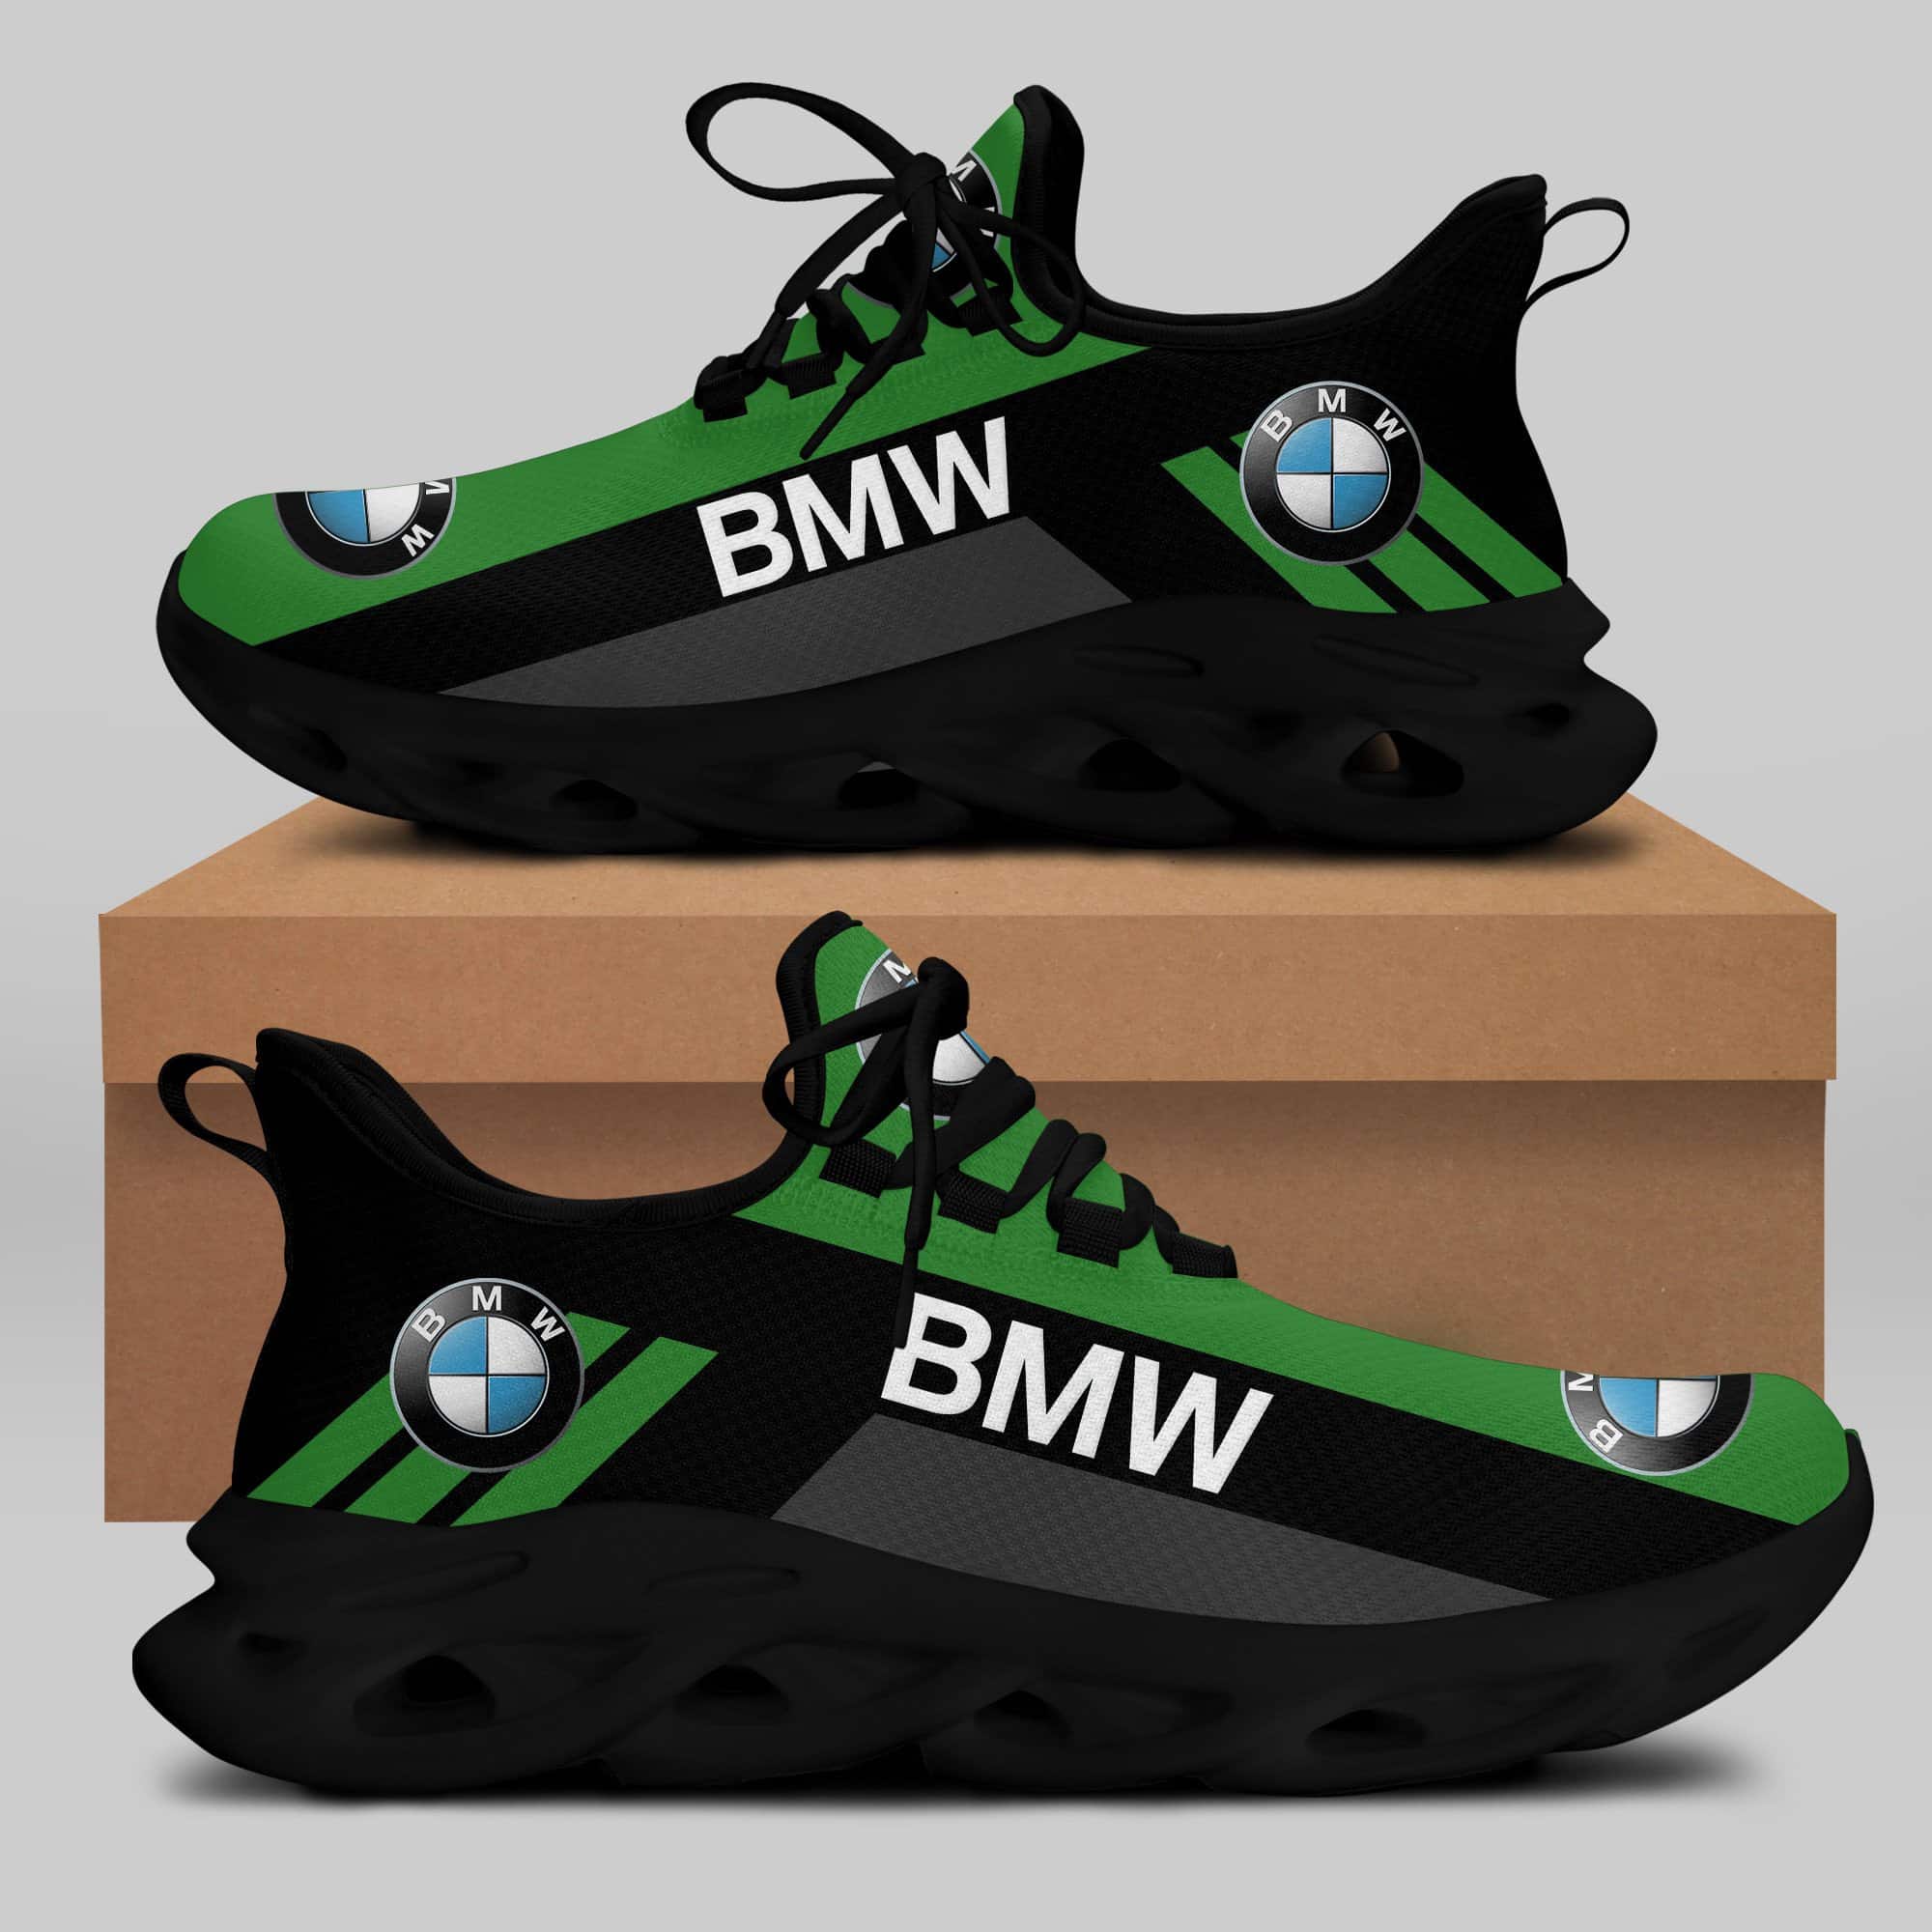 Bmw Running Shoes Max Soul Shoes Sneakers Ver 23 1